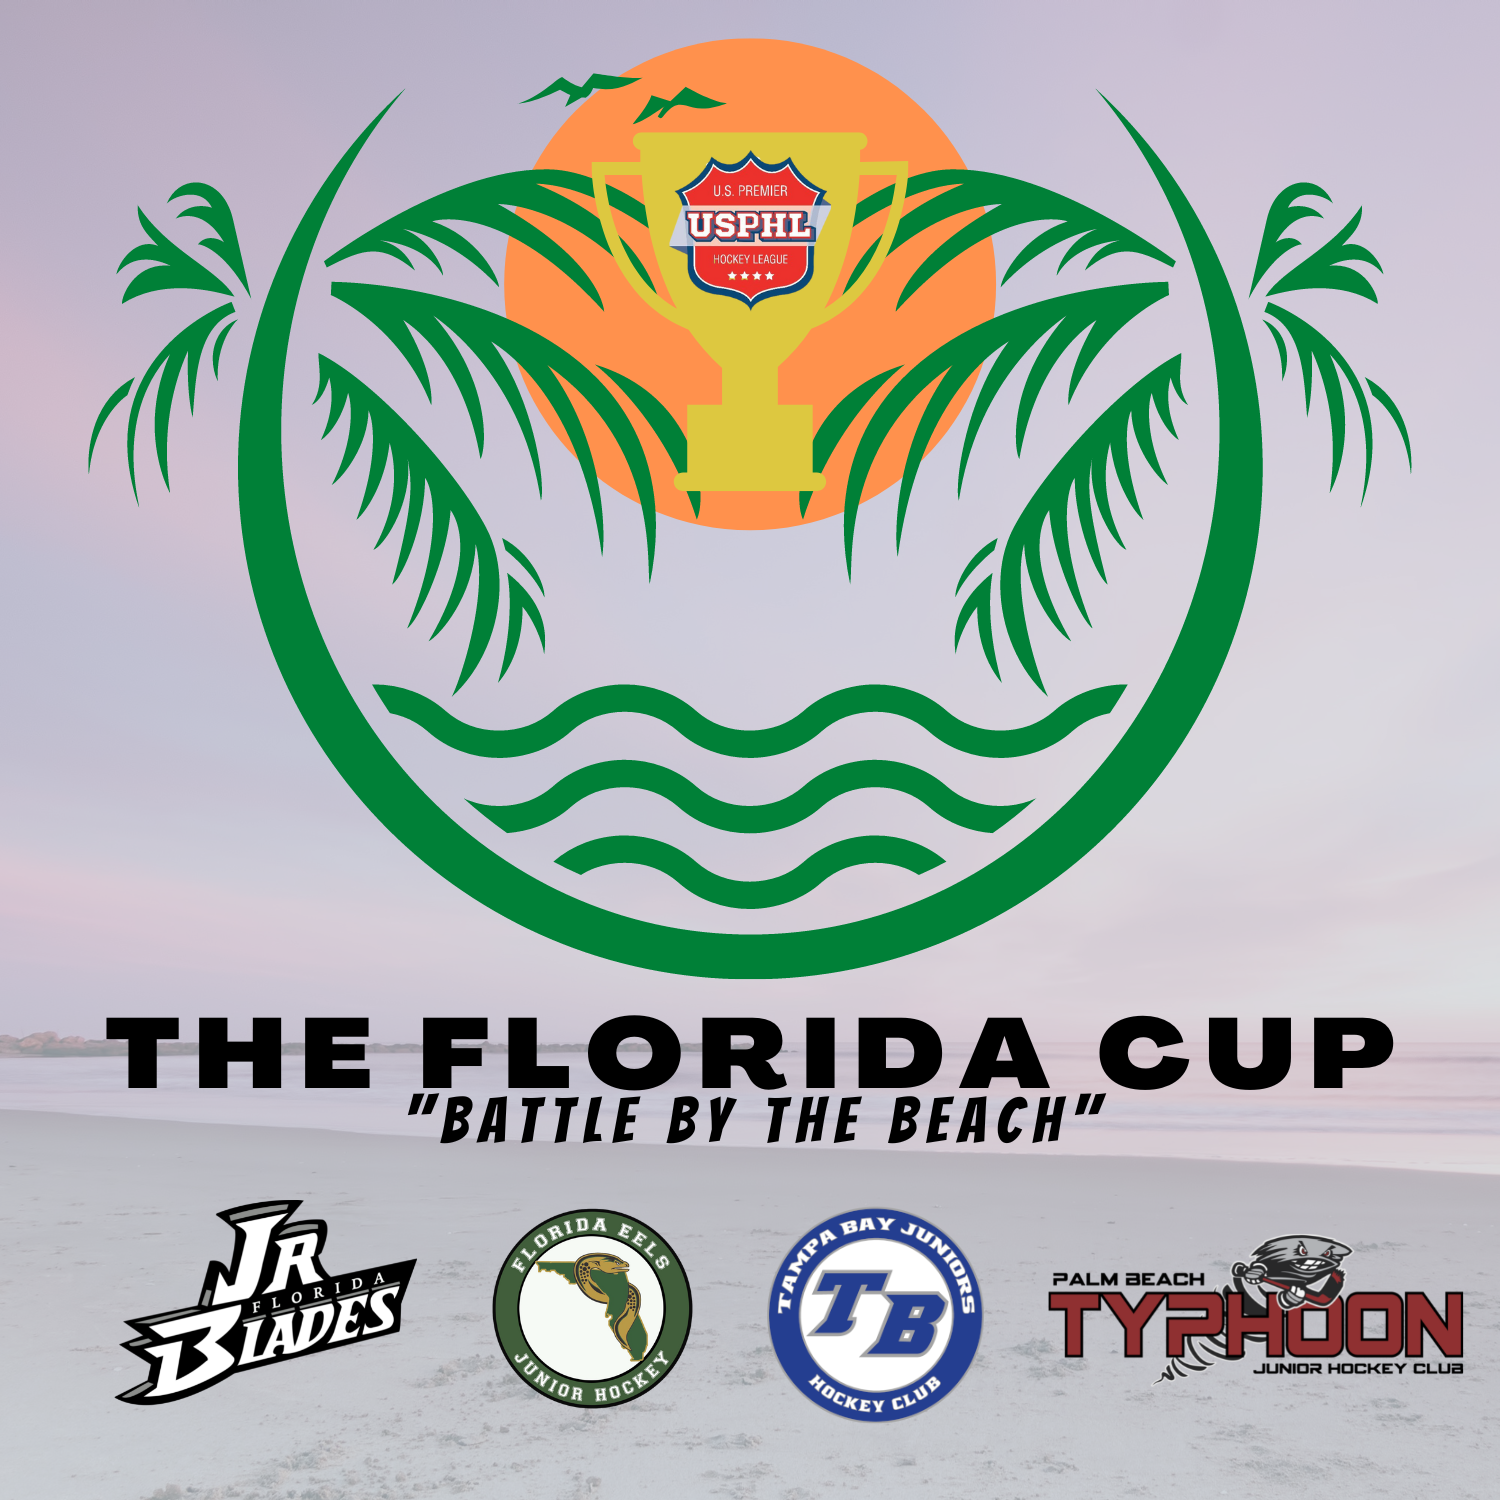 Florida Eels Set To Host Florida Cup, Featured On Local News Station